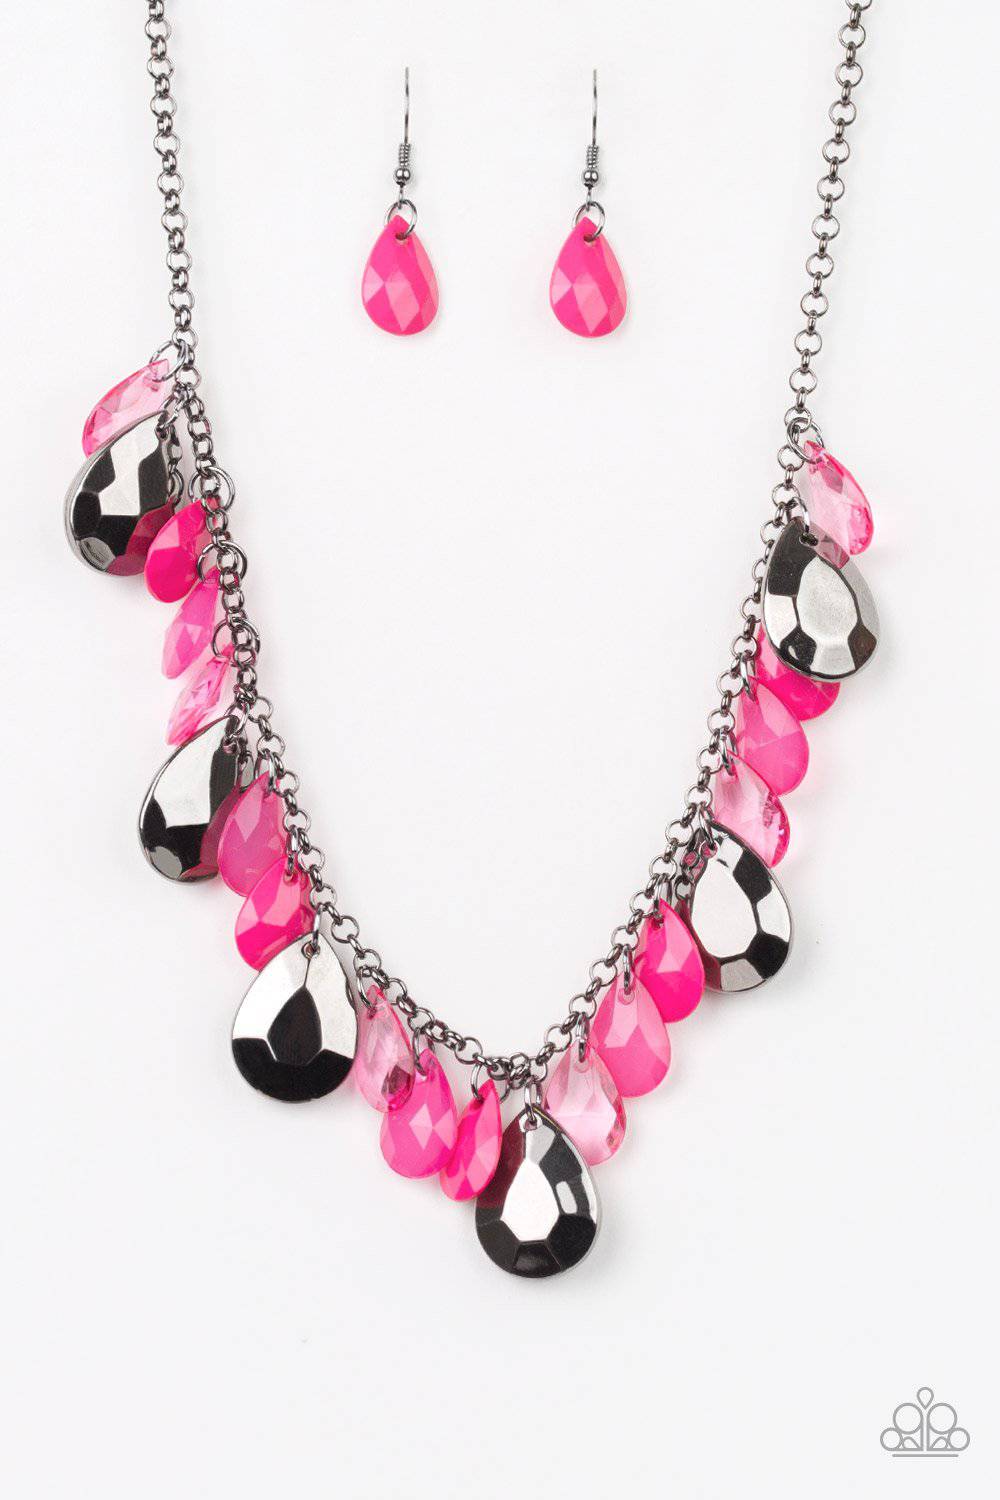 A78 - Hurricane Season Pink Necklace by Paparazzi Accessories on Fancy5Fashion.com